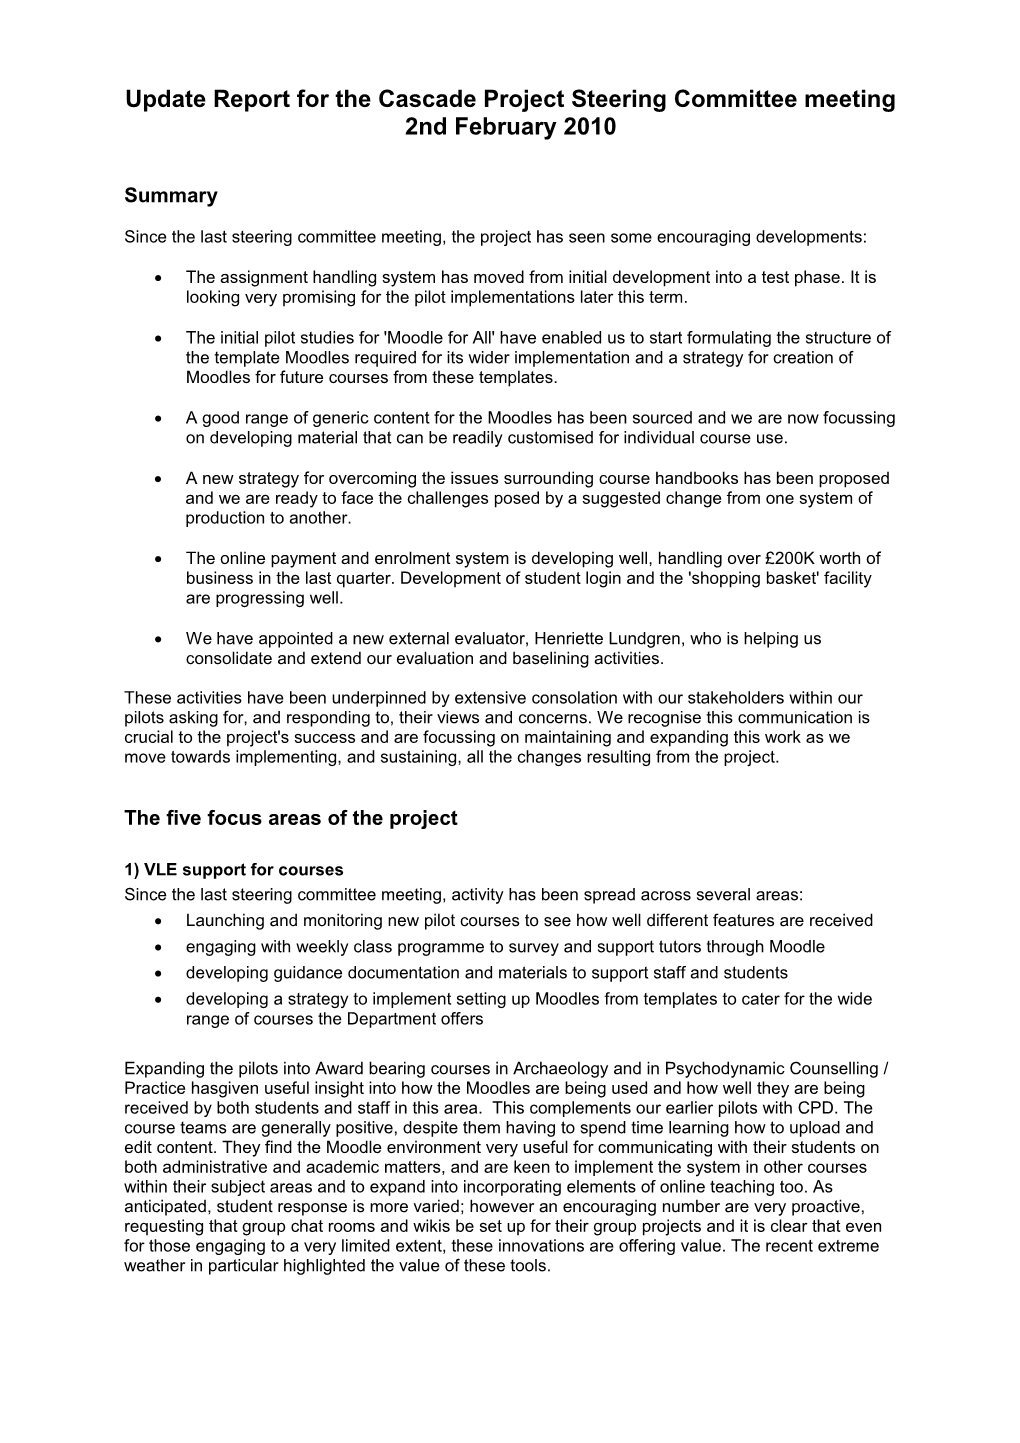 JISC Project Document Cover Sheet